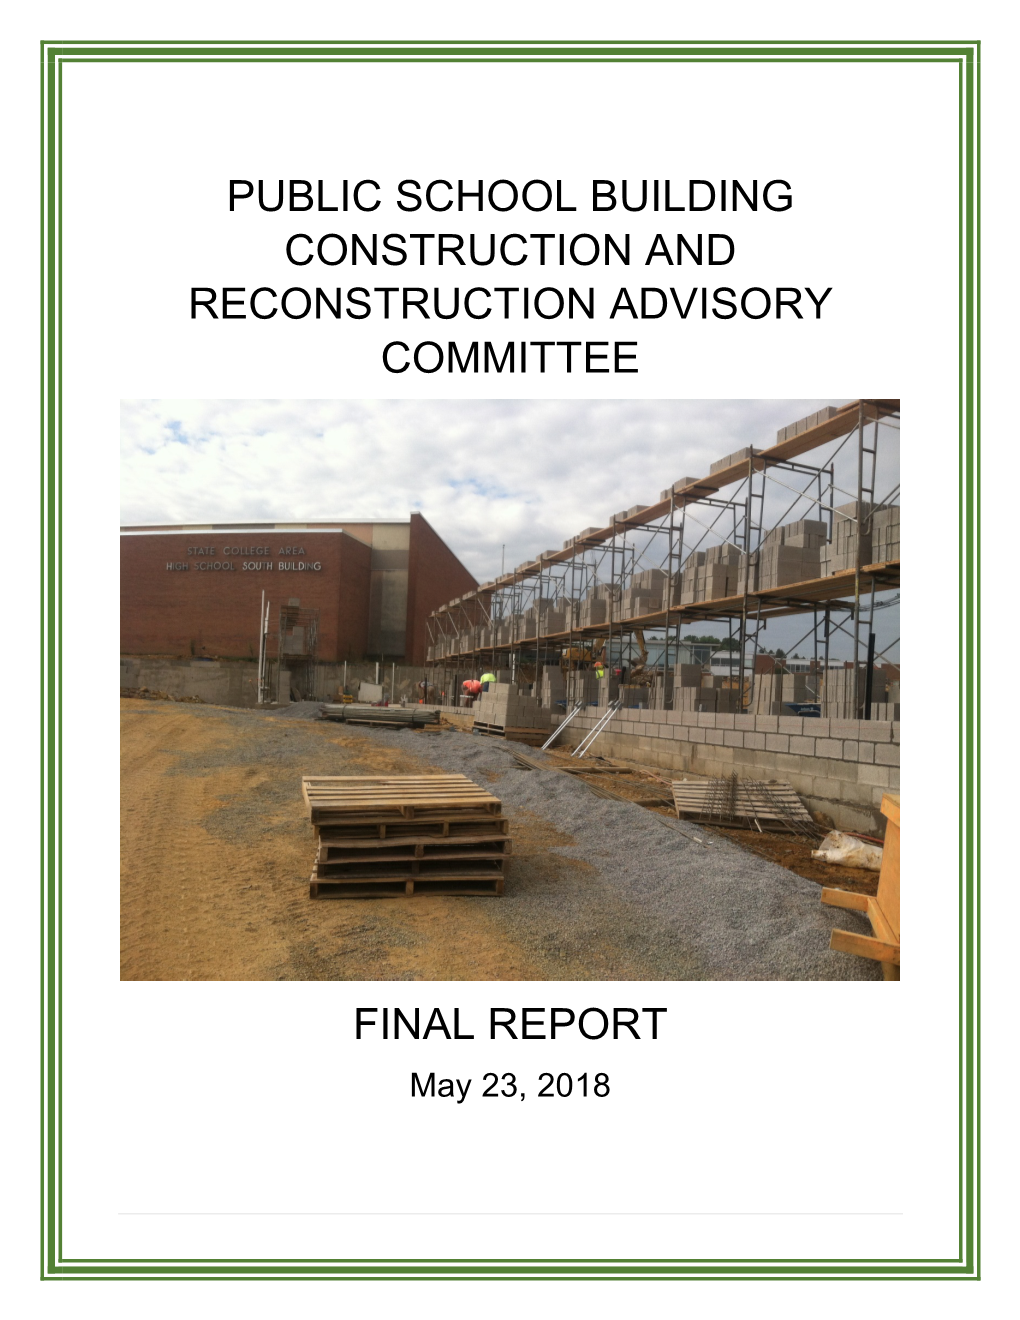 Public School Building Construction and Reconstruction Advisory Committee